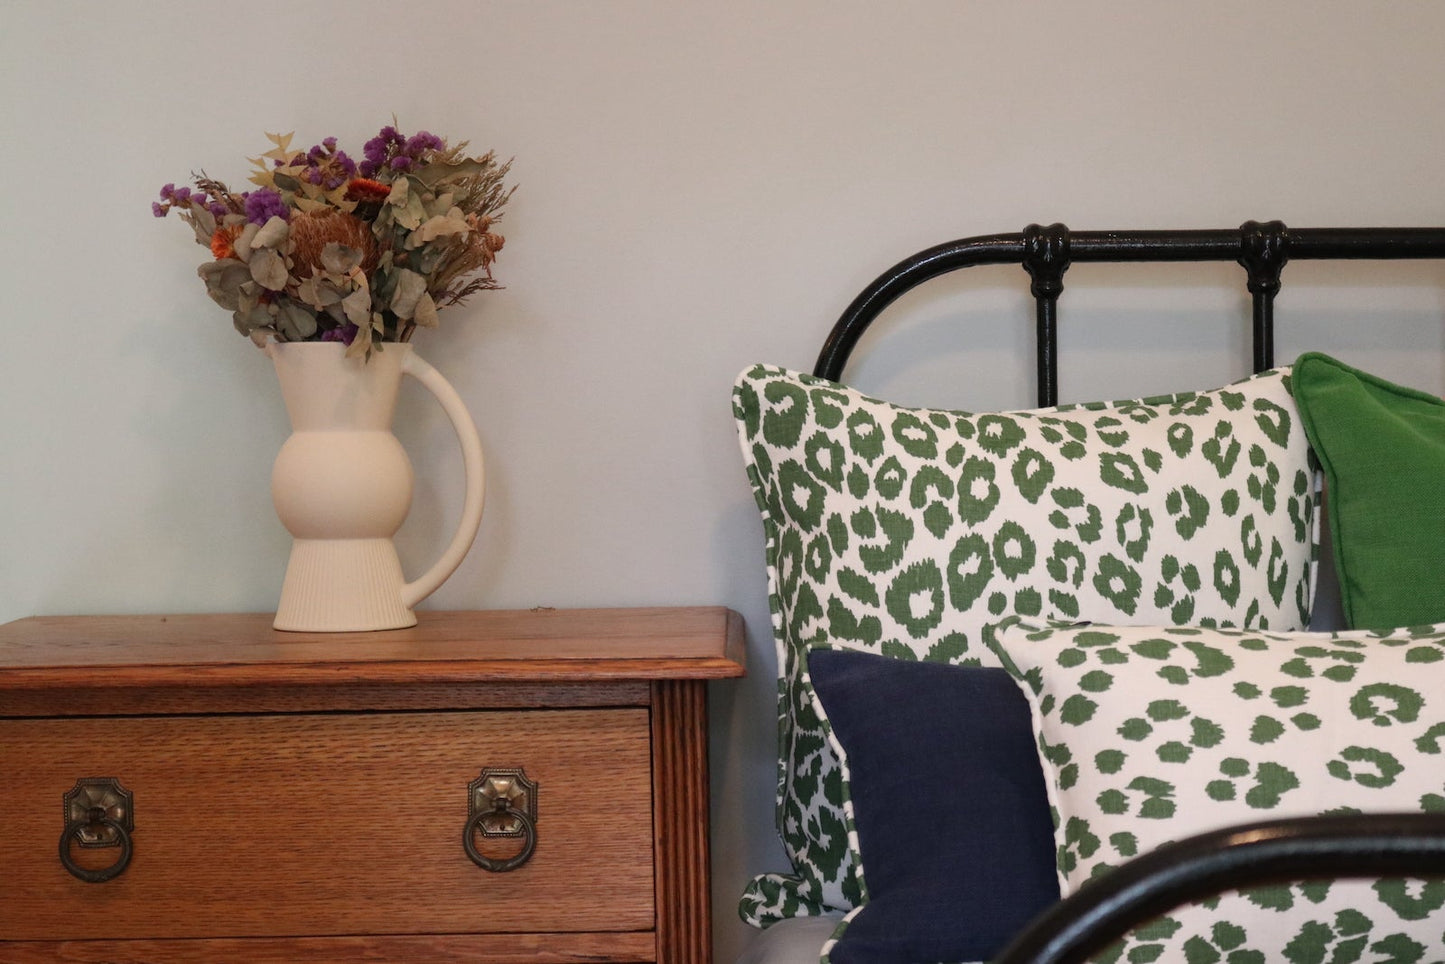 In situ image of the 50cm x 50cm Bespoke Scatter Cushion Featuring Schumacher's Iconic Leopard in Green on a wrought iron bed.